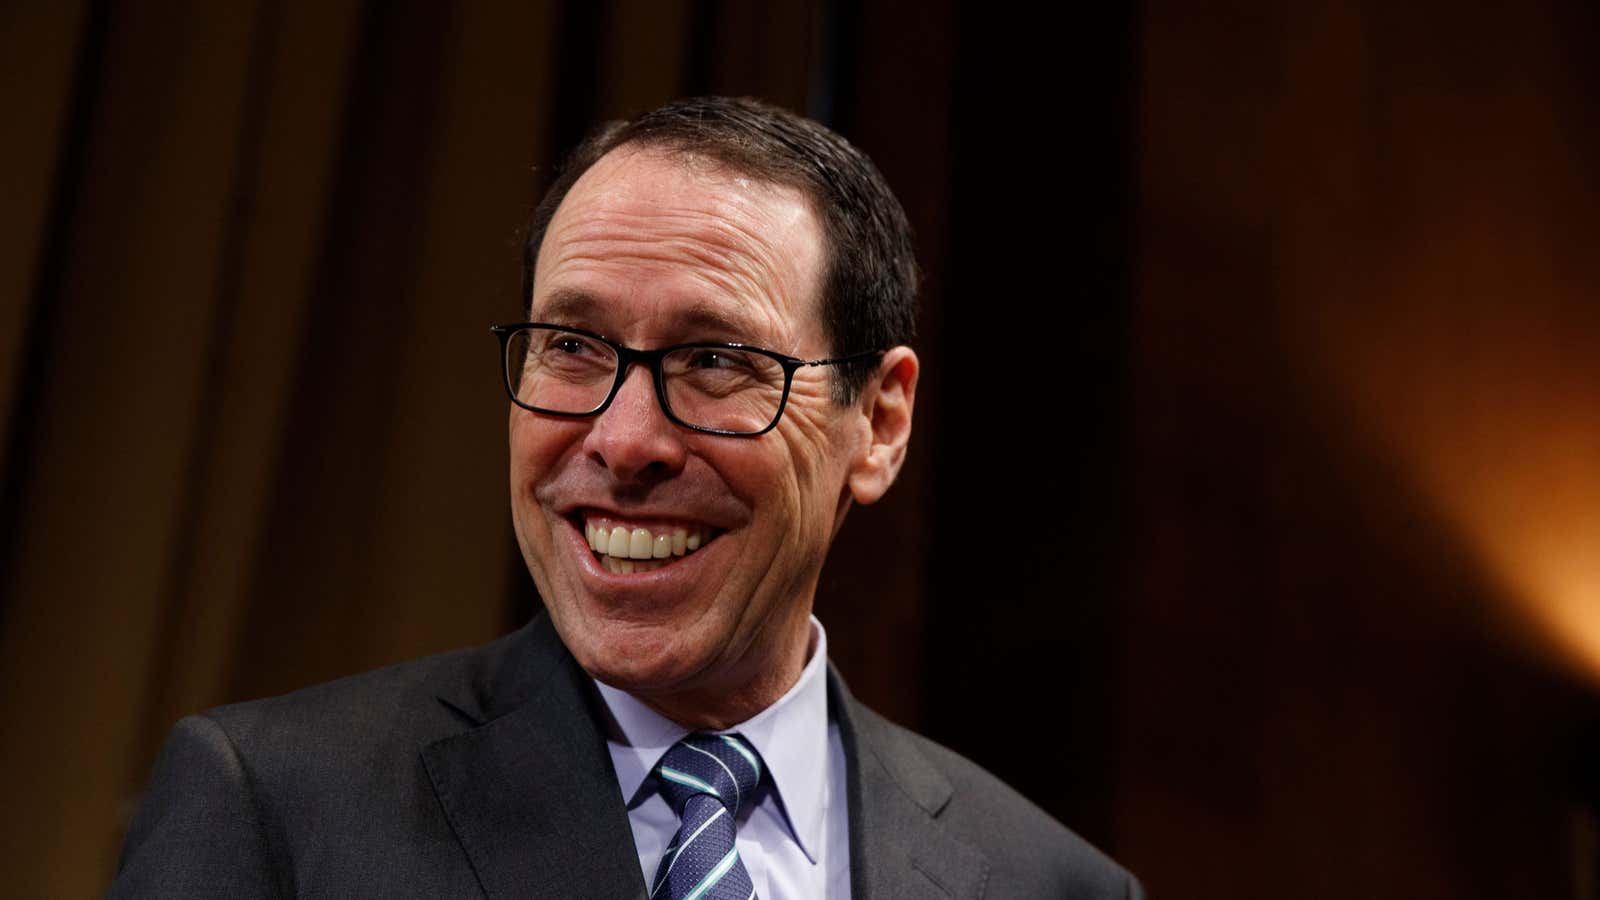 AT&amp;T’s Randall Stephenson is making big moves to shore up his company’s digital future.